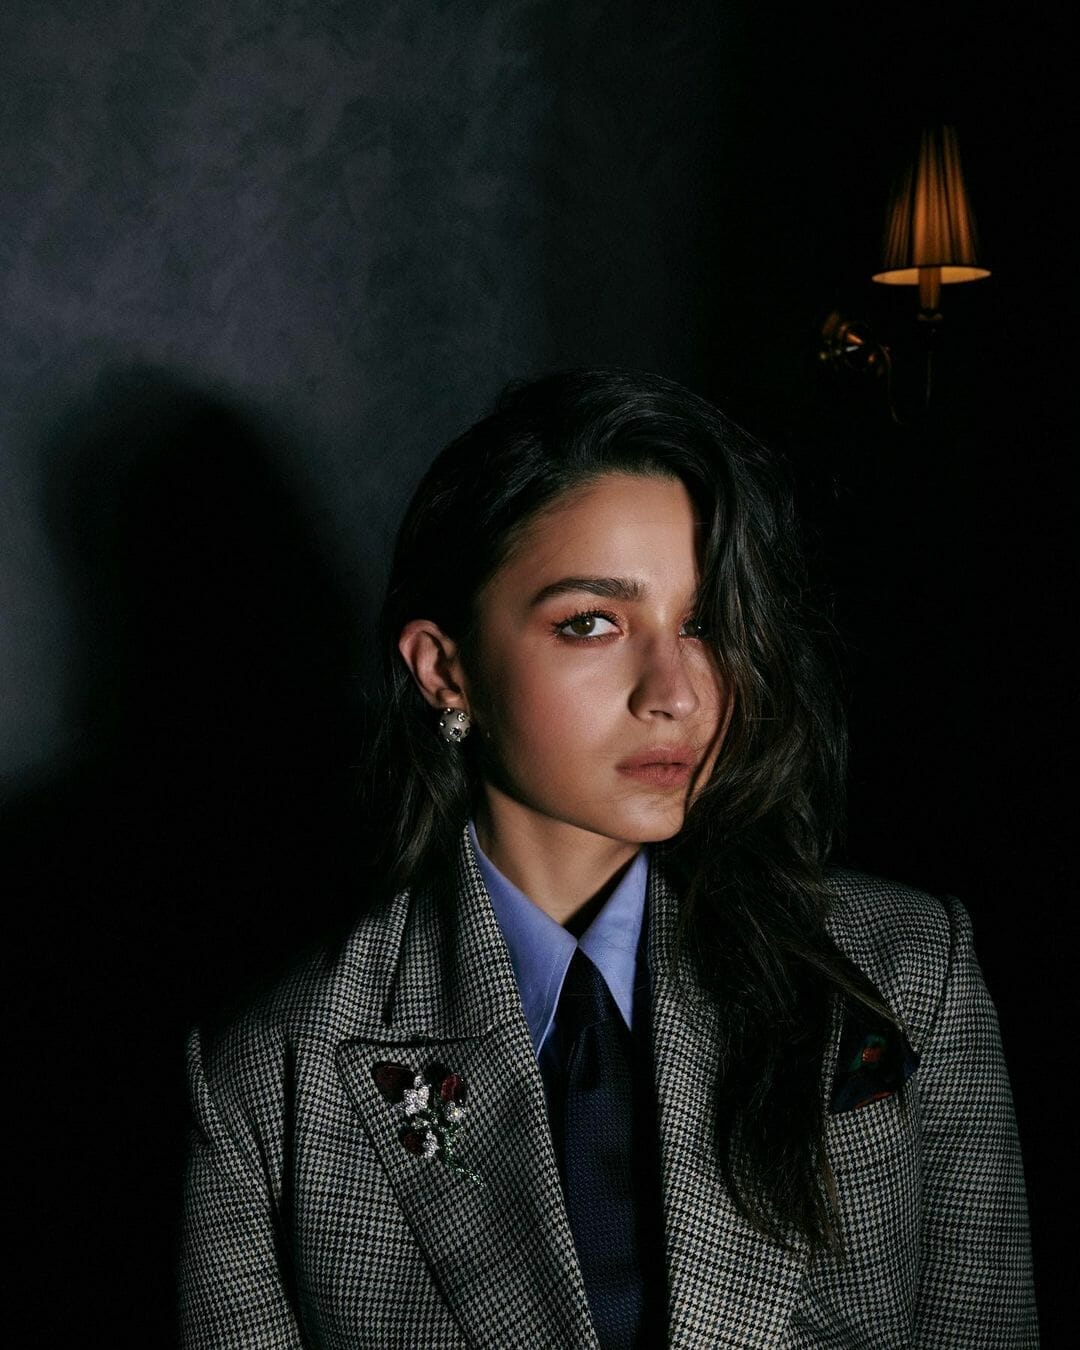 Alia Bhatt Announced as the First Indian Global Ambassador for Gucci